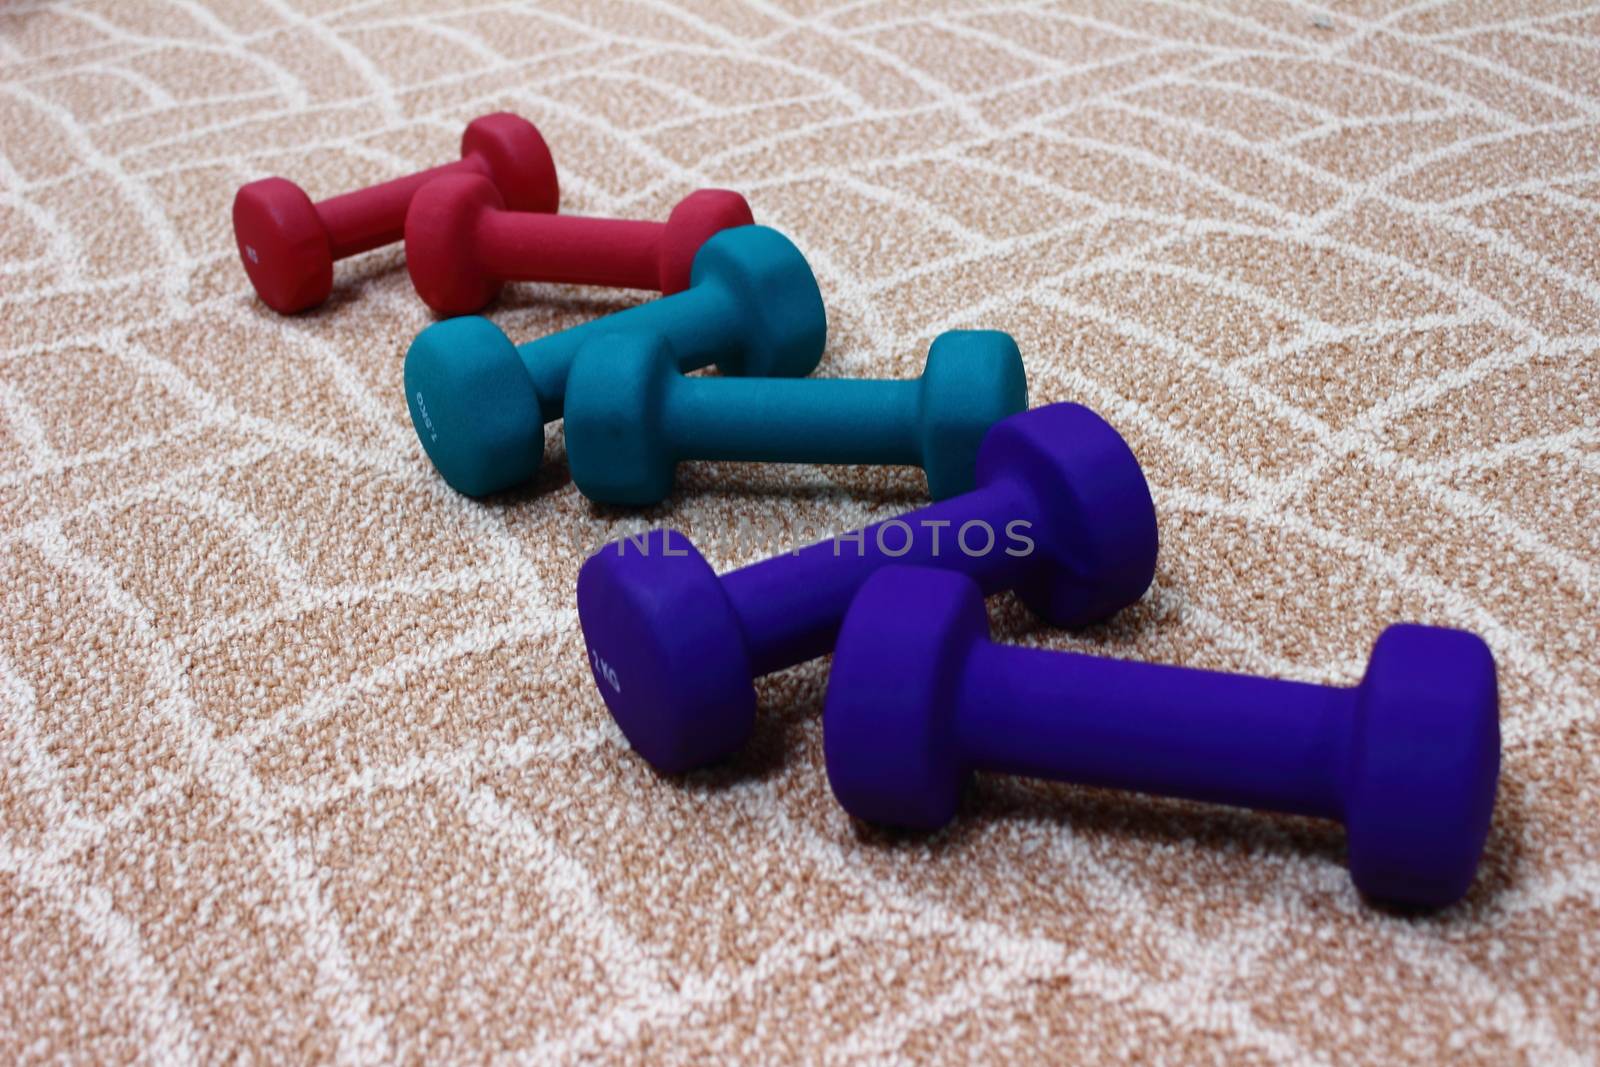 Colorful dumbbells lie asymmetrically ready for sports